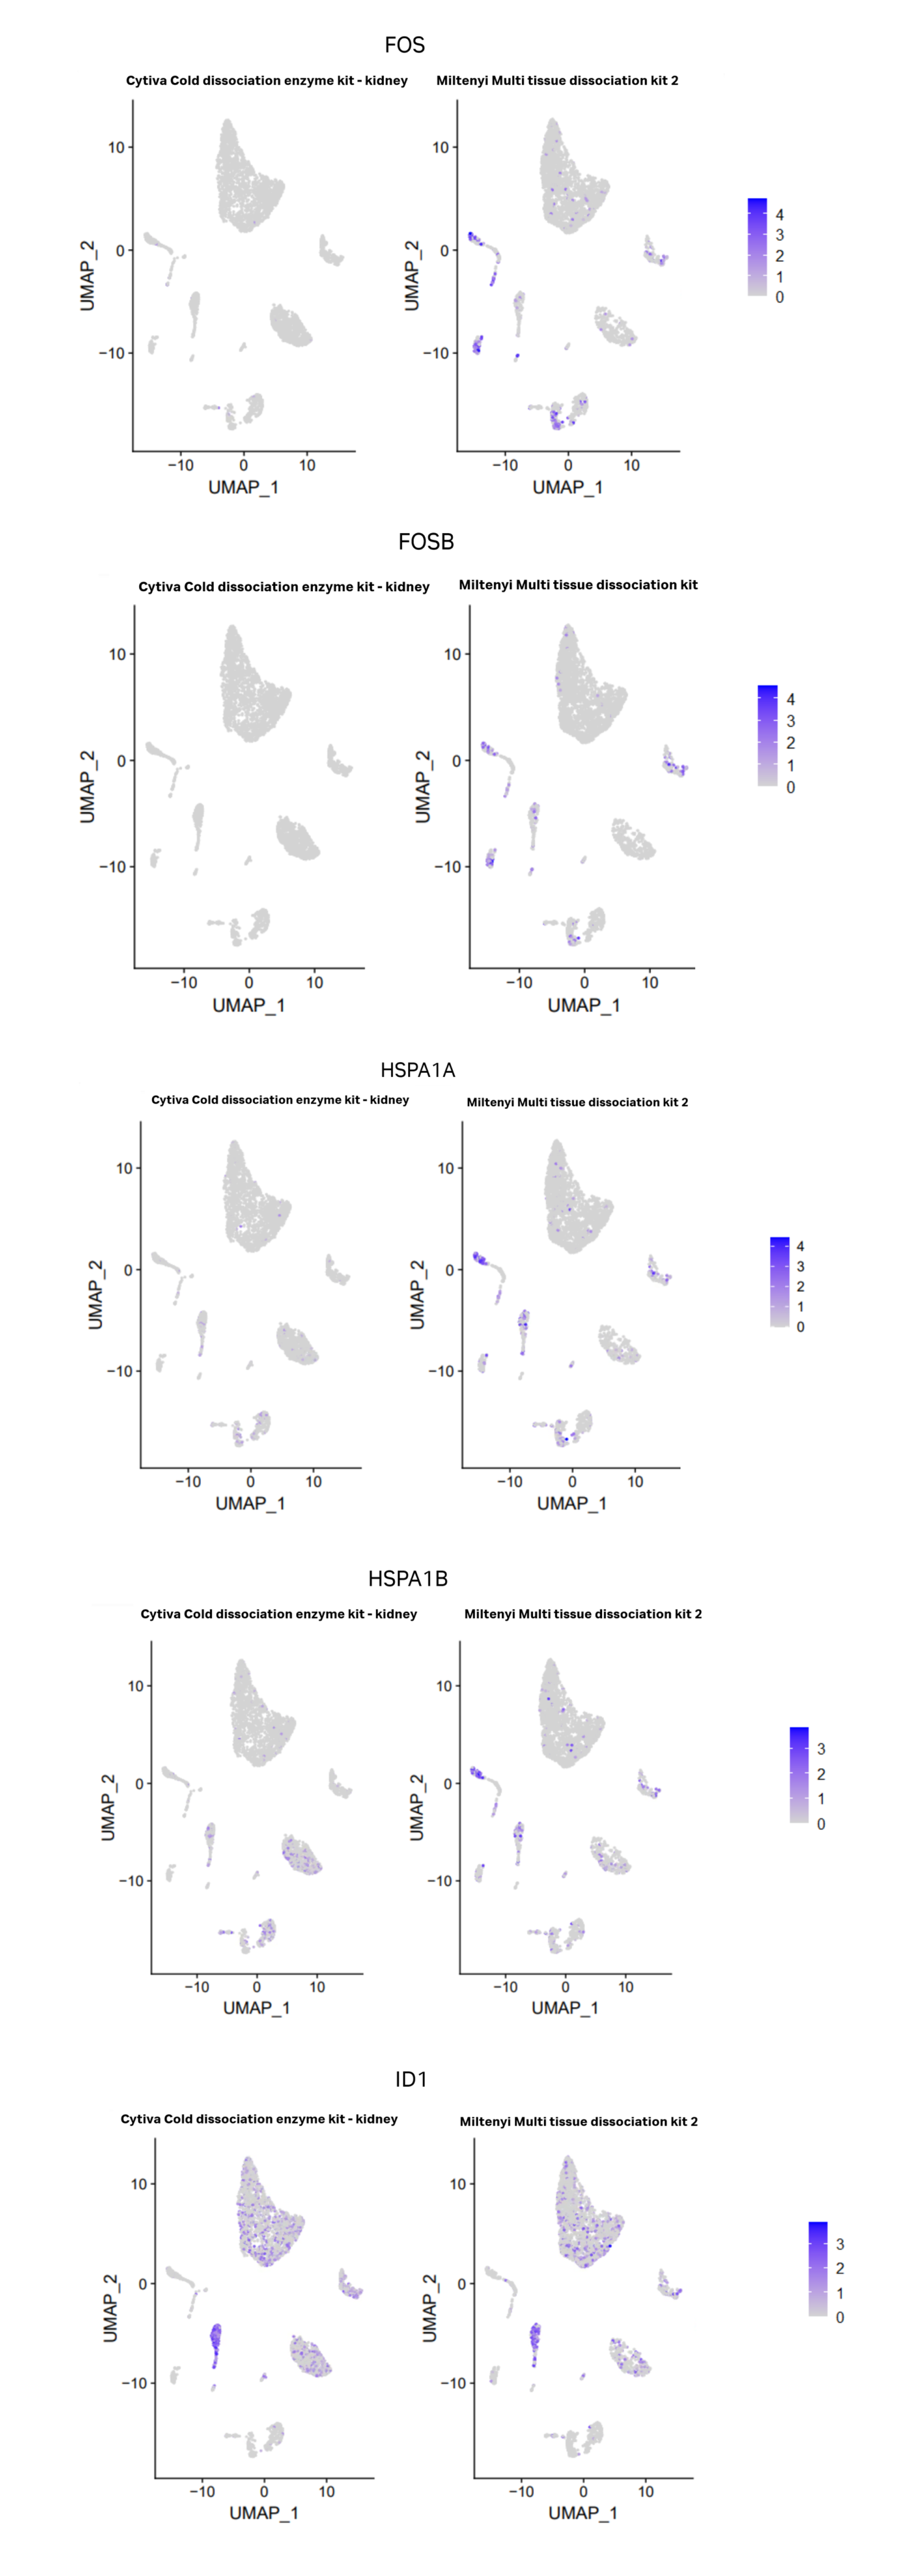 Feature plots displaying differences in expression of 4 key stress response genes FOS, FOSB, HSPA1A, HSPA1B between Miltenyi’s multi tissue dissociation kit 2 and Cytiva’s Cold dissociation enzyme mix - kidney